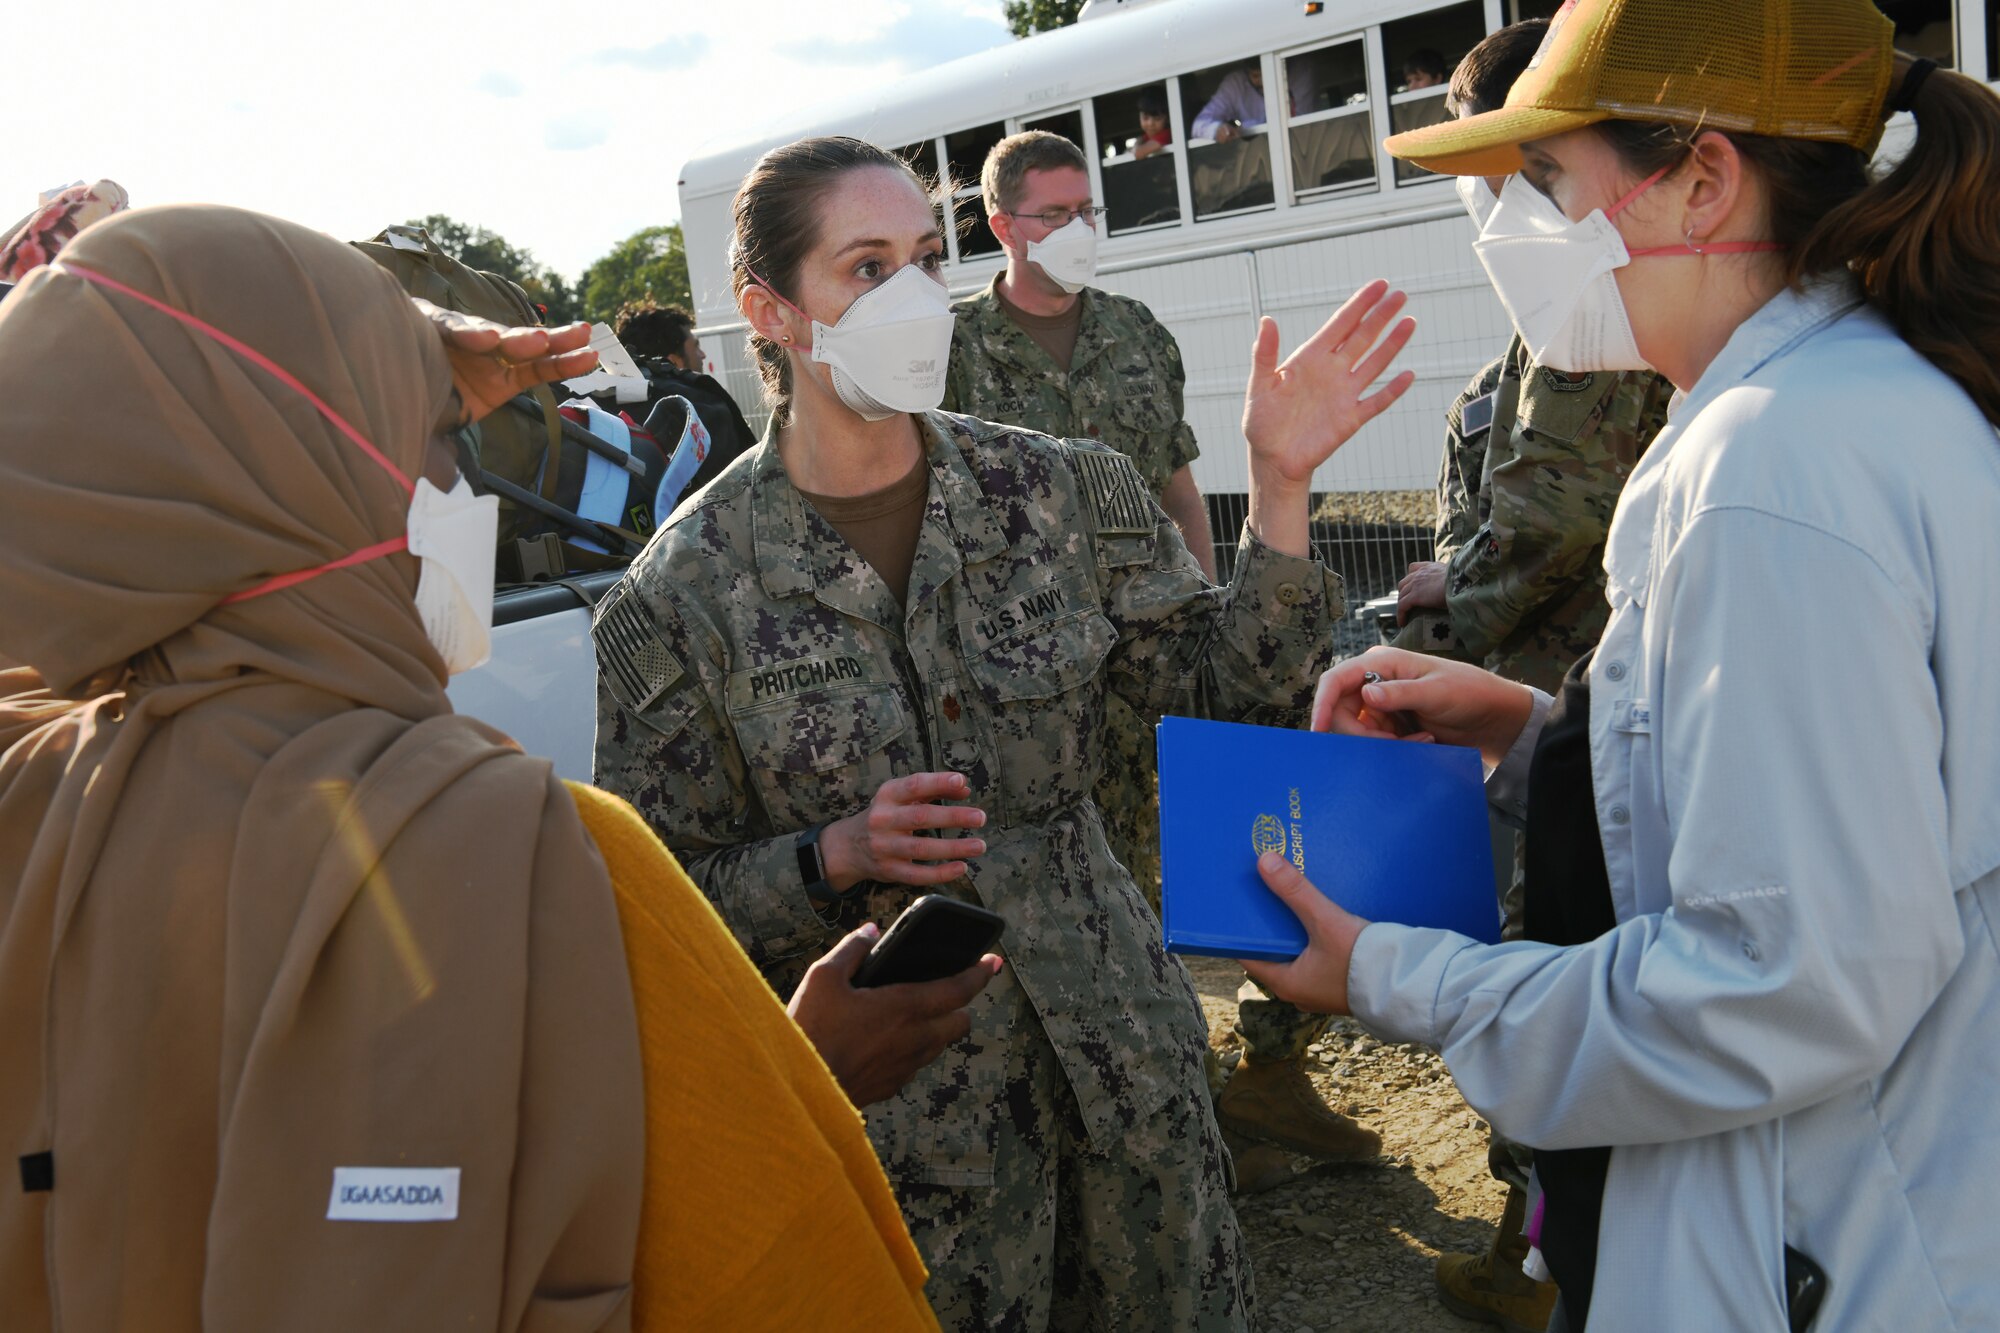 U.S. Navy Lt. Cmdr. Nikki Pritchard, (center) assigned to the Marine Corps Air Ground Combat Center, 29 Palms, San Bernardino, California, and Public Health Lead for Task Force Liberty, interacts with staff members preparing to open the new medical station Liberty Village, Joint Base McGuire-Dix-Lakehurst, New Jersey, Sept. 11, 2021.  The Department of Defense, through U.S. Northern Command, and in support of the Department of Homeland Security, is providing transportation, temporary housing, medical screening, and general support for at least 50,000 Afghan evacuees at suitable facilities, in permanent or temporary structures, as quickly as possible. This initiative provides Afghan personnel essential support at secure locations outside Afghanistan. (National Guard photo by Master Sgt. John Hughel, Washington Air National Guard)